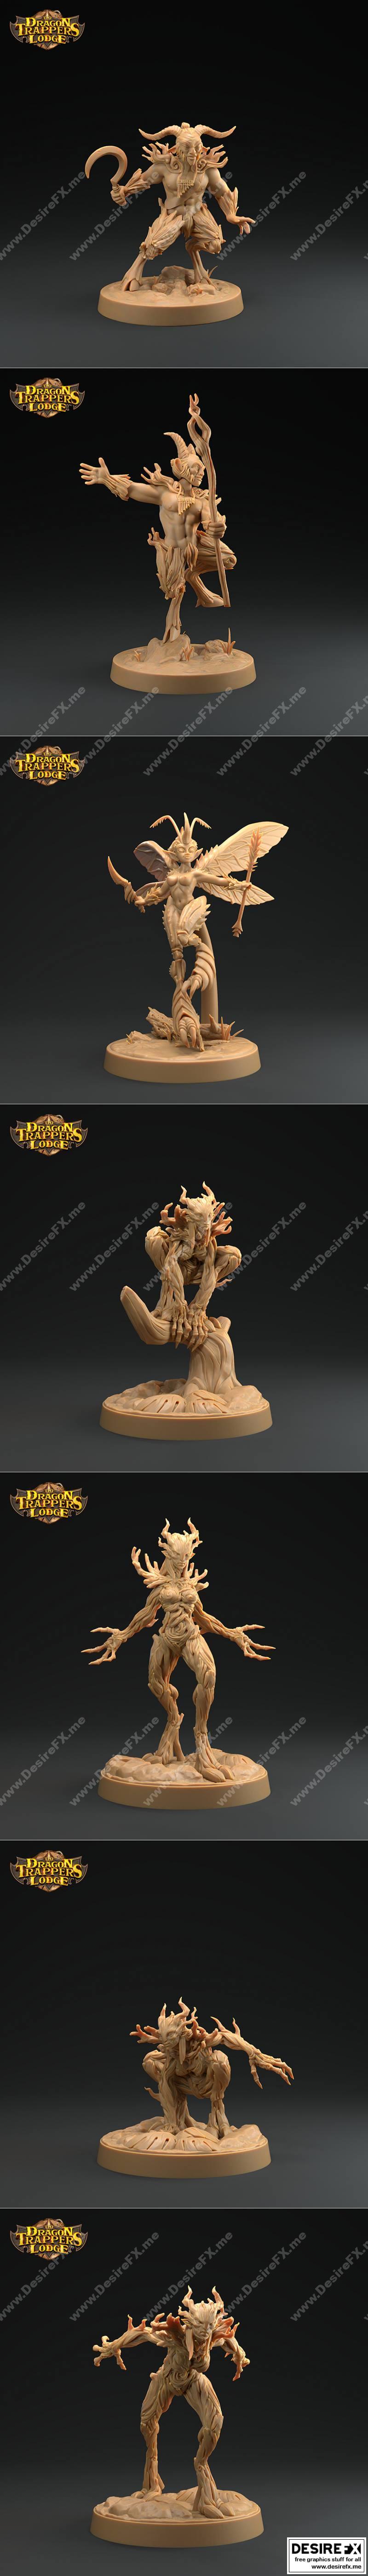 Desire FX 3d models | The Dragon Trappers Lodge – Battle for the ...